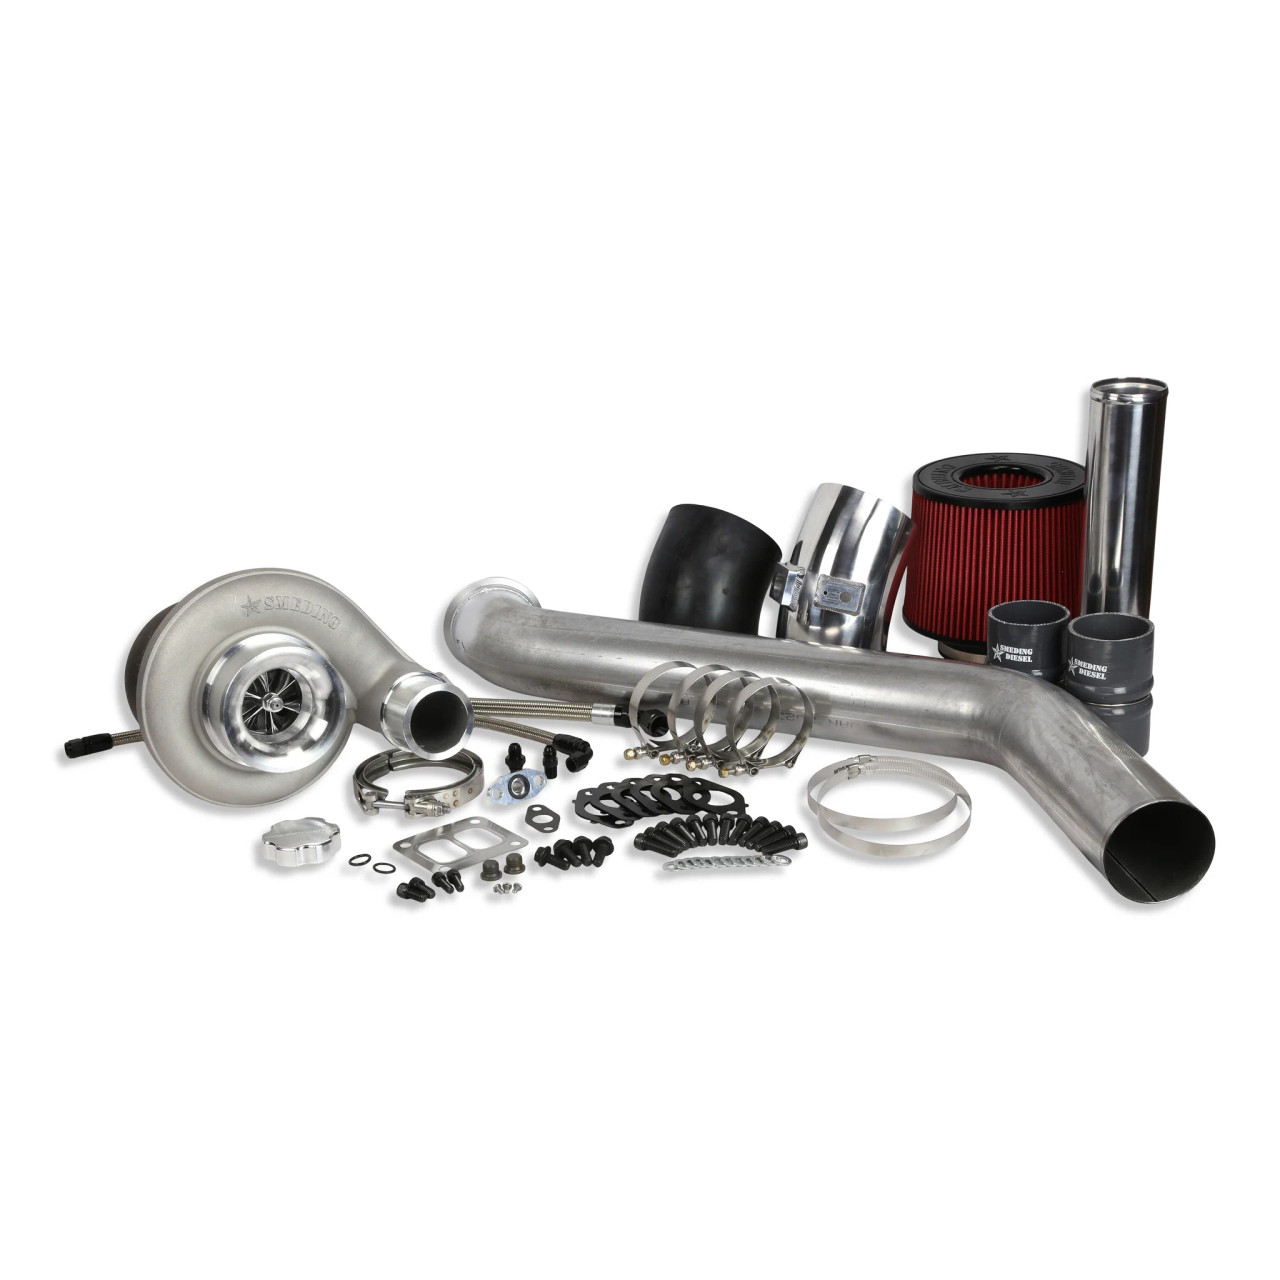 Smeding Diesel S400 Kit with Turbo and Manifold for 2003 to 2007 Dodge 5.9L Cummins - Main View